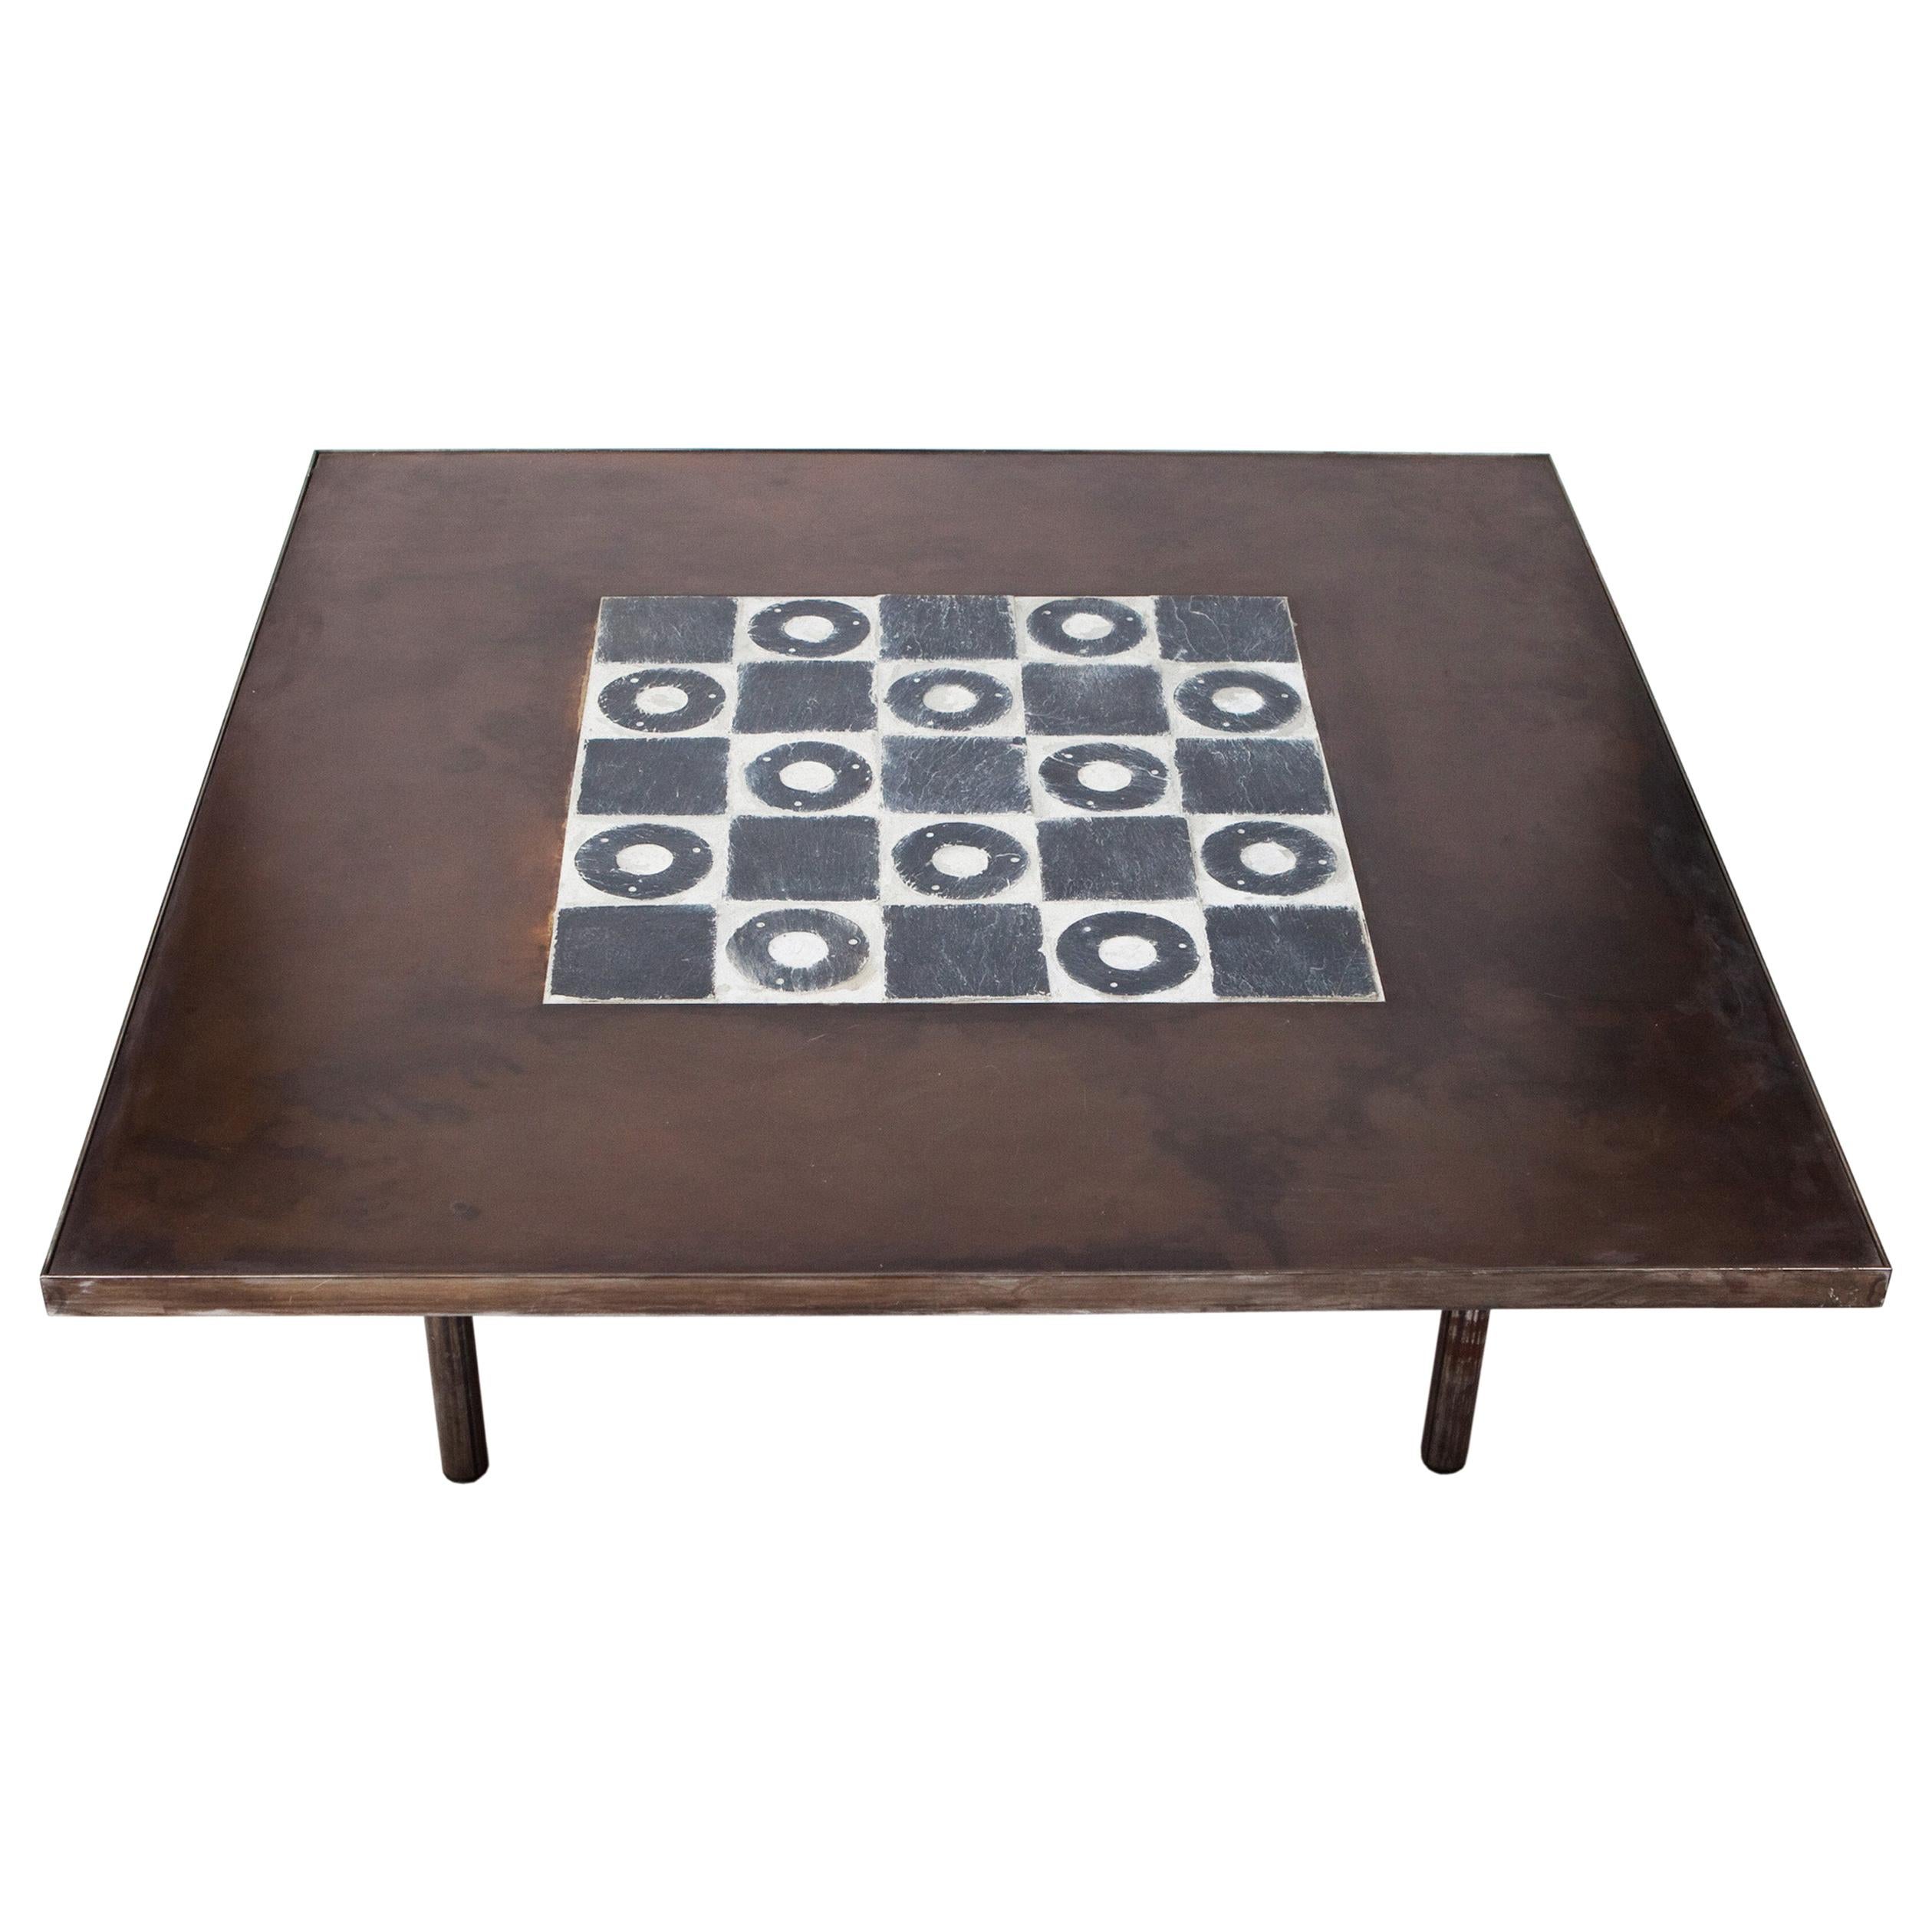 Low Tiles Table For Sale